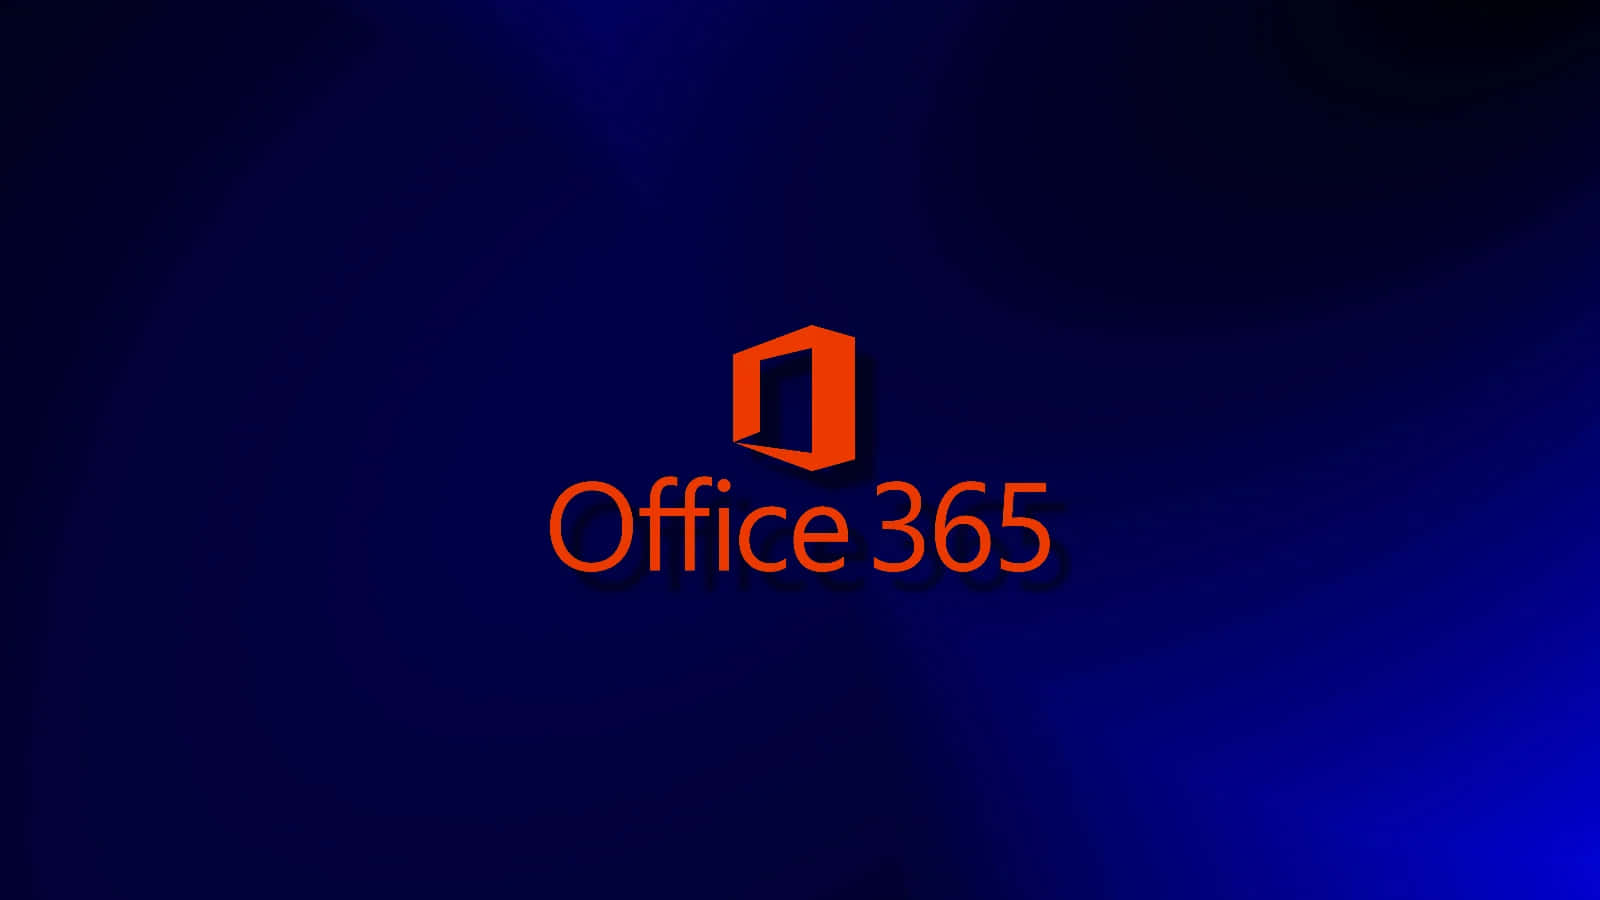 Office 365 Logo On A Blue Background